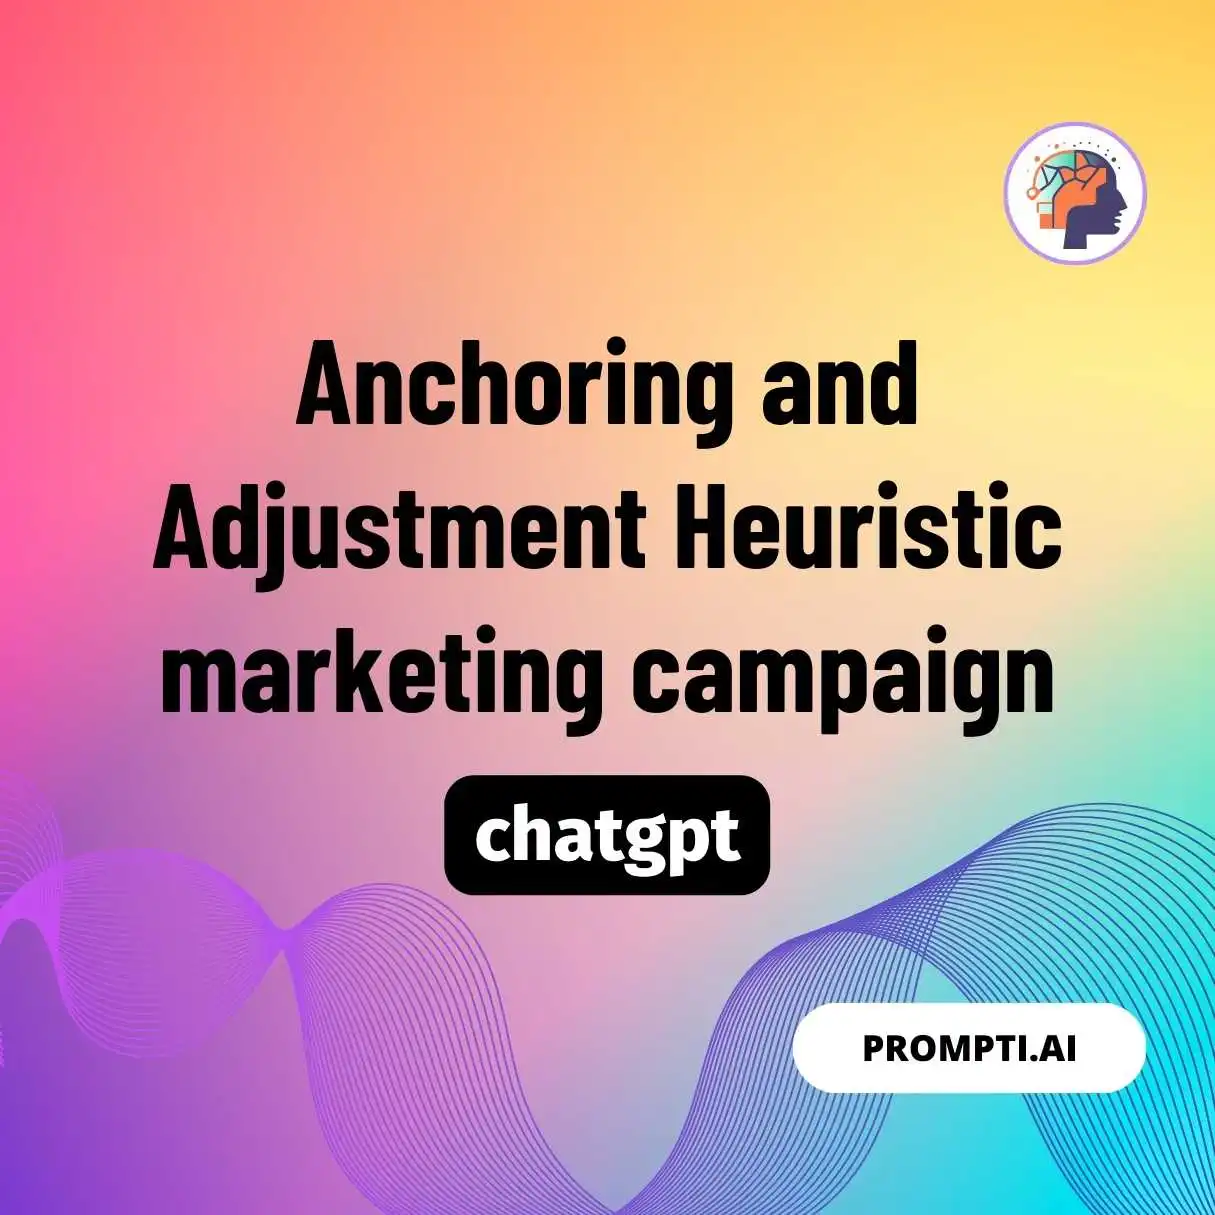 Anchoring and Adjustment Heuristic marketing campaign